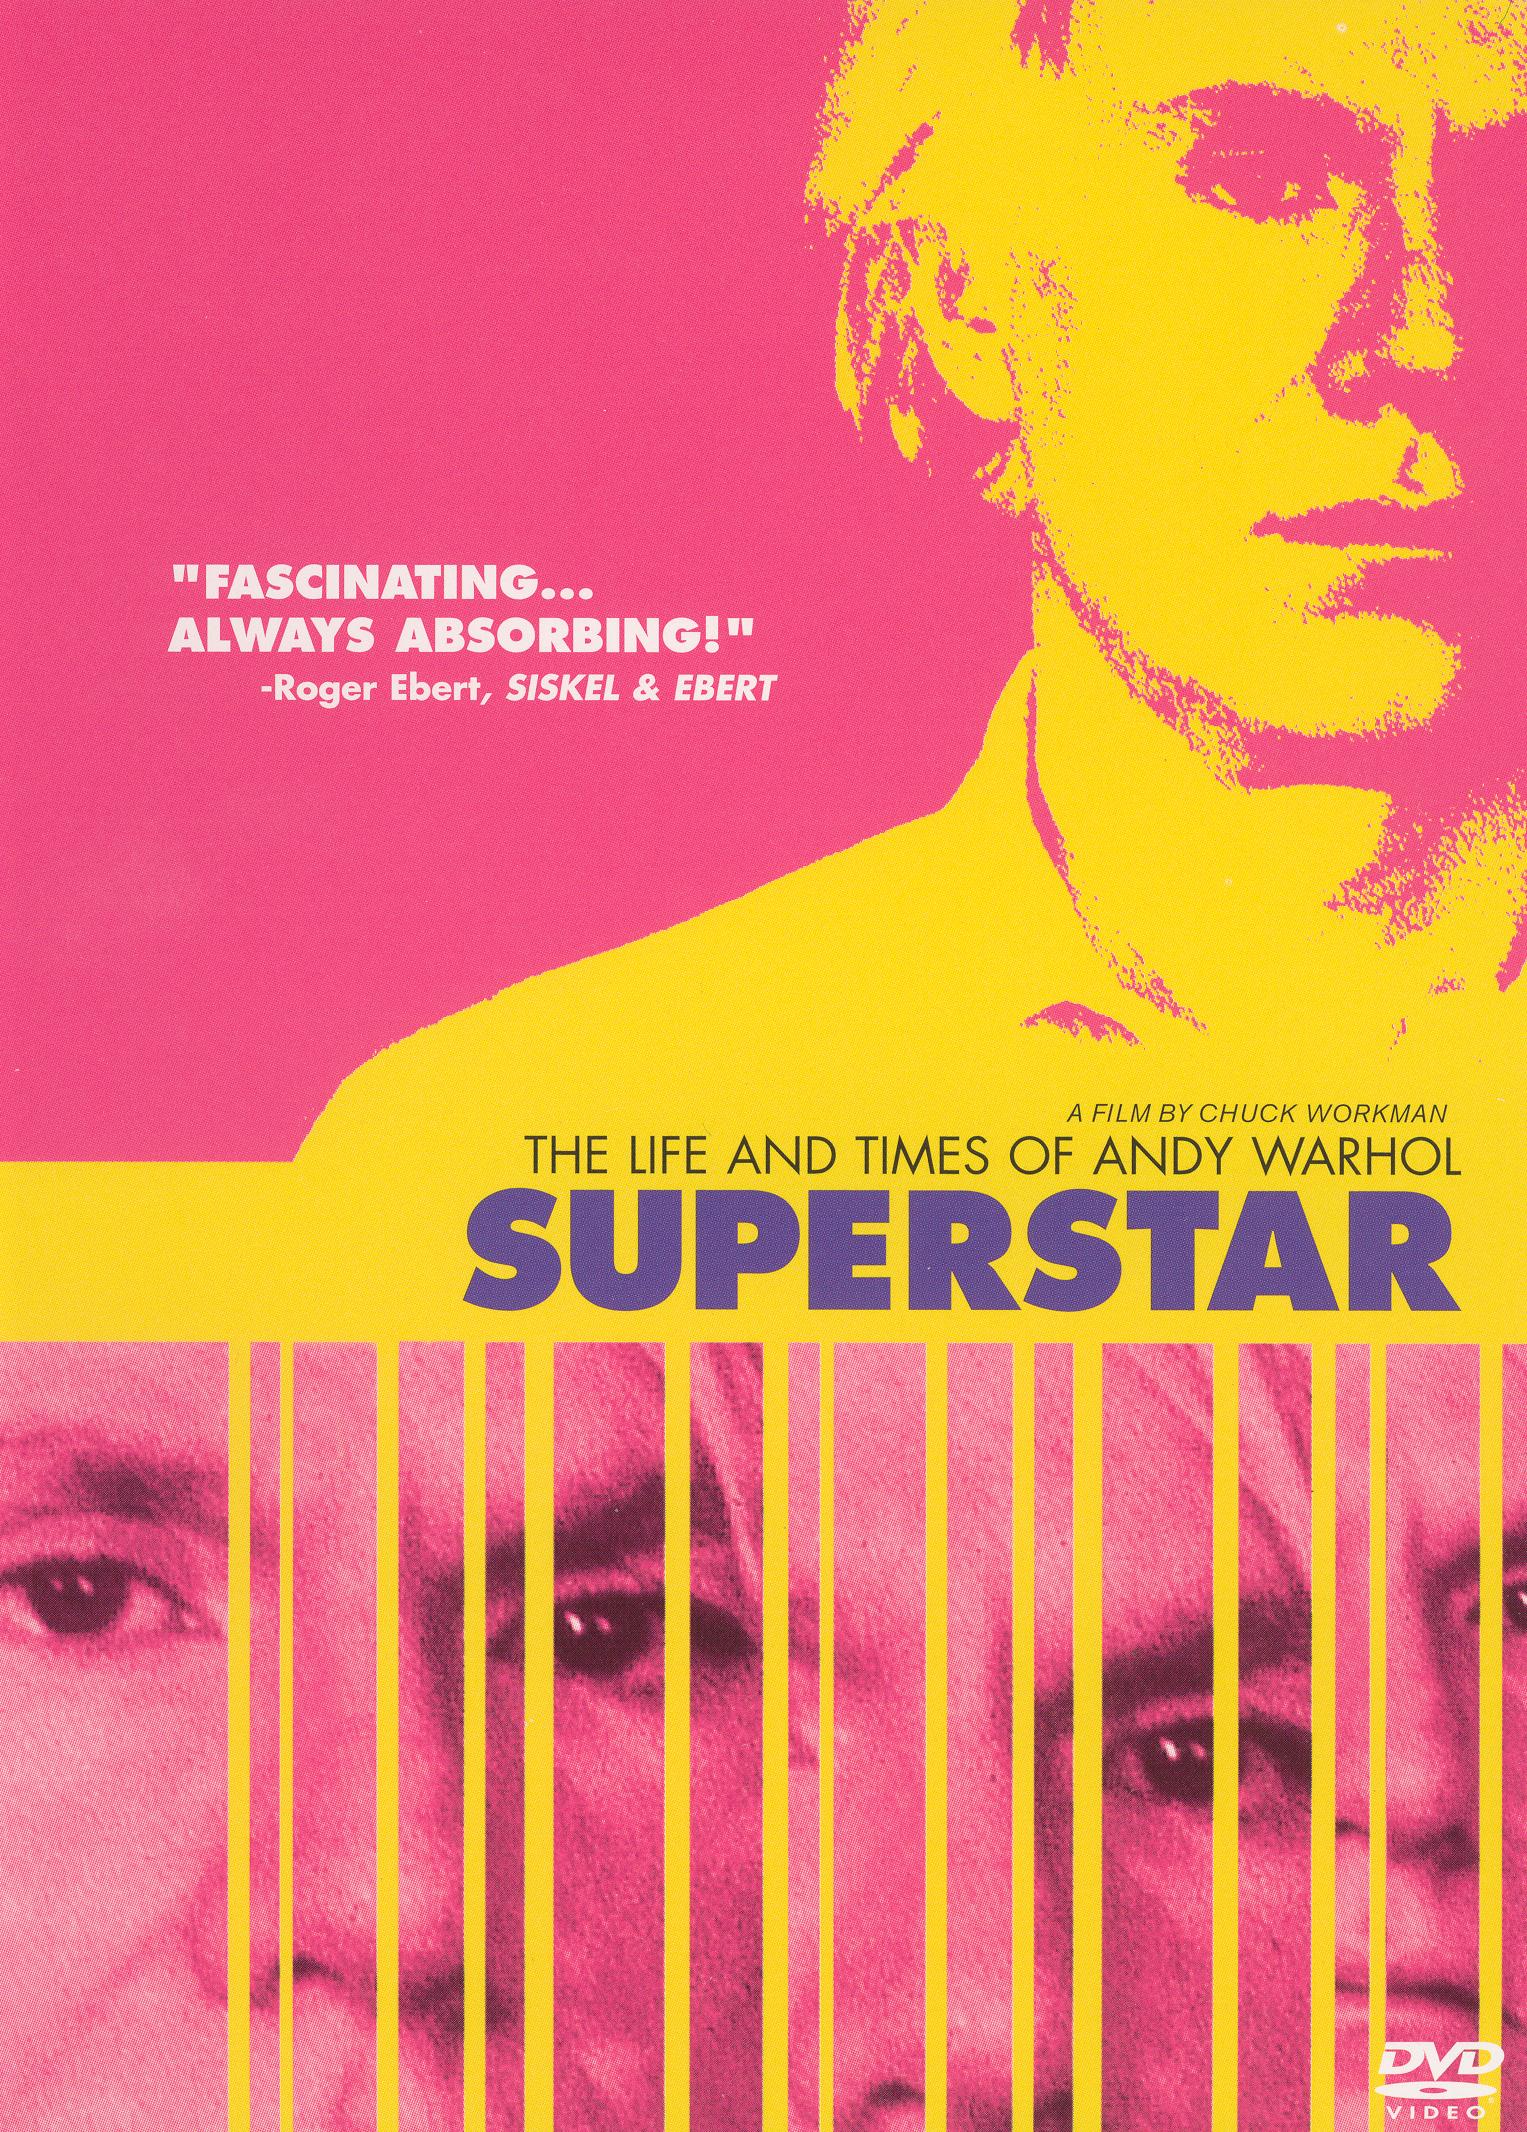 Superstar: The Life and Times of Andy Warhol [DVD] [1990] - Best Buy